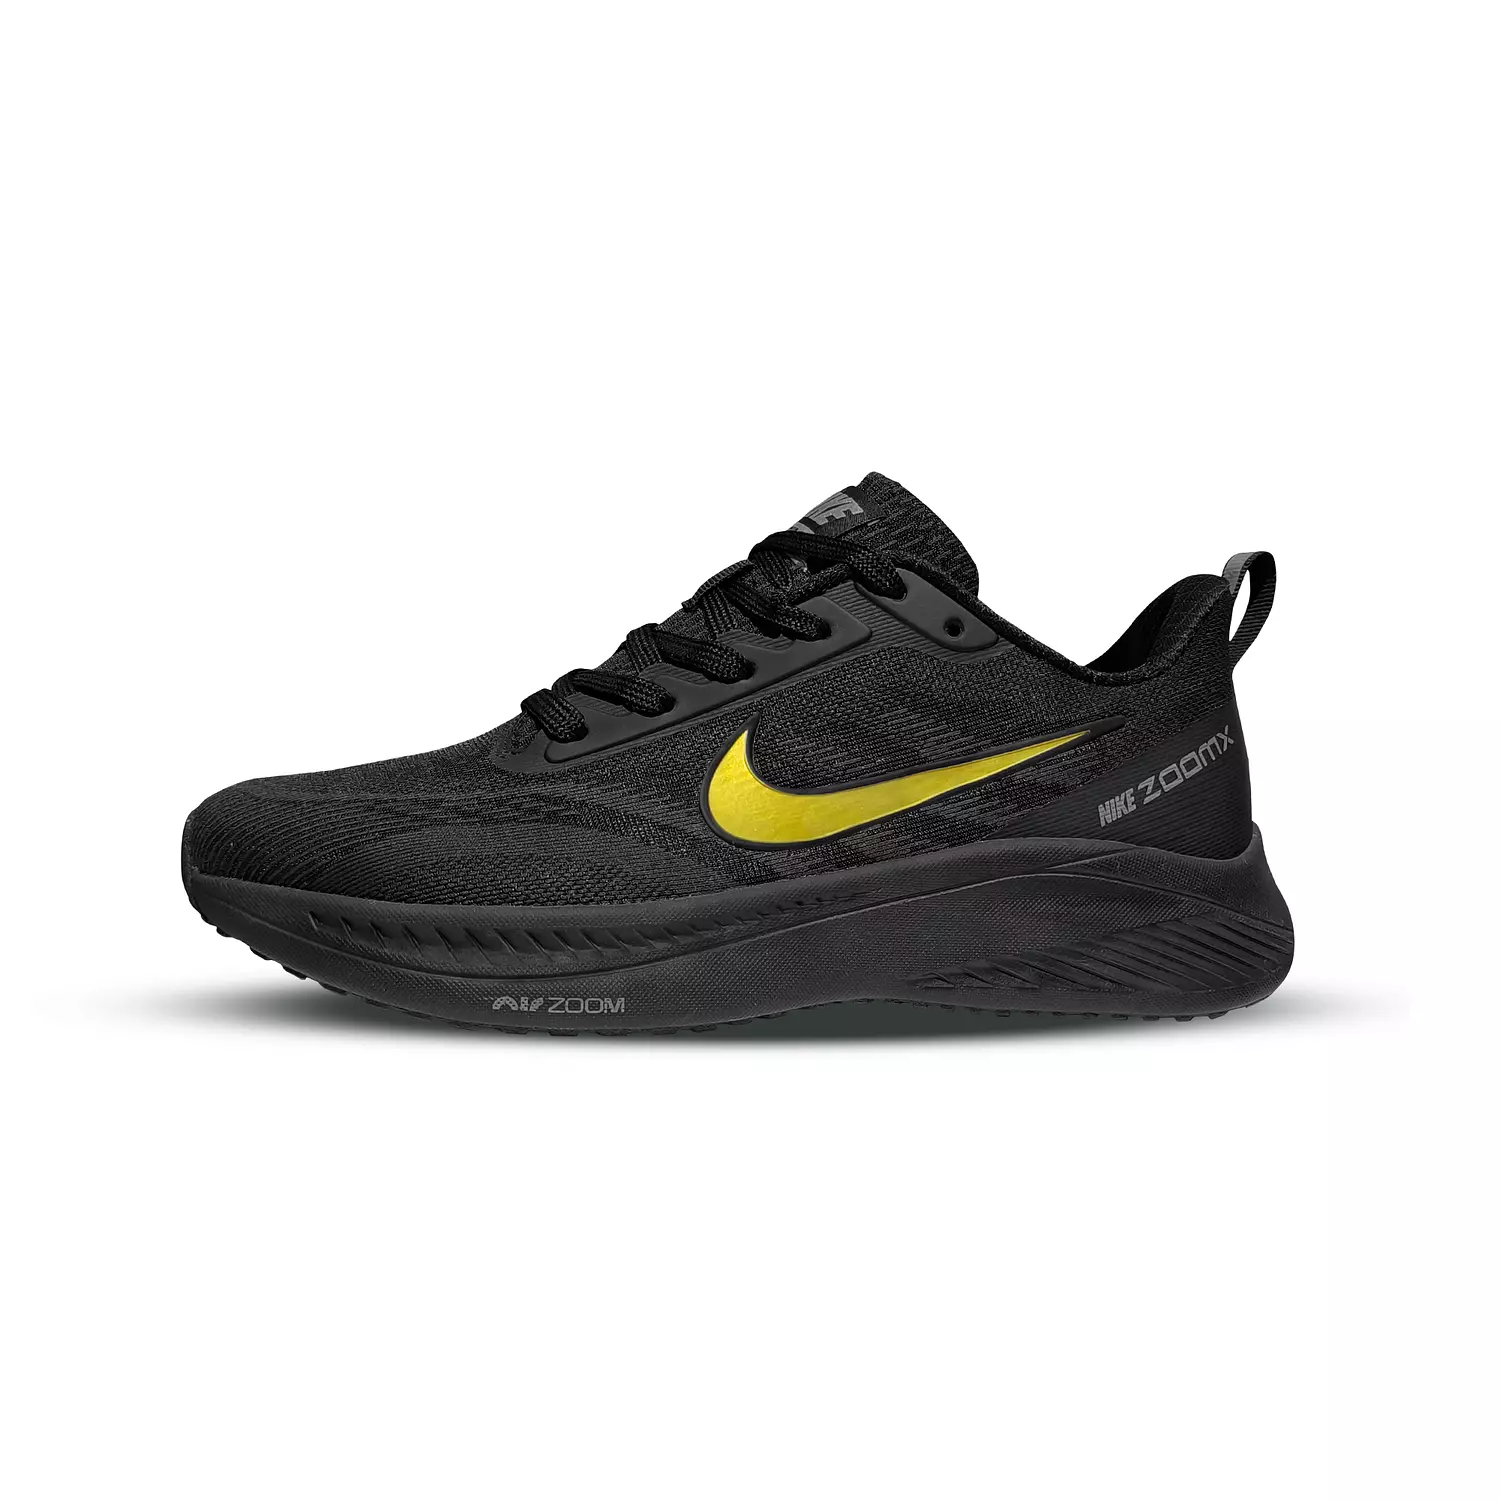 NIKE AIR ZOOM X -RUNNING SHOES 1